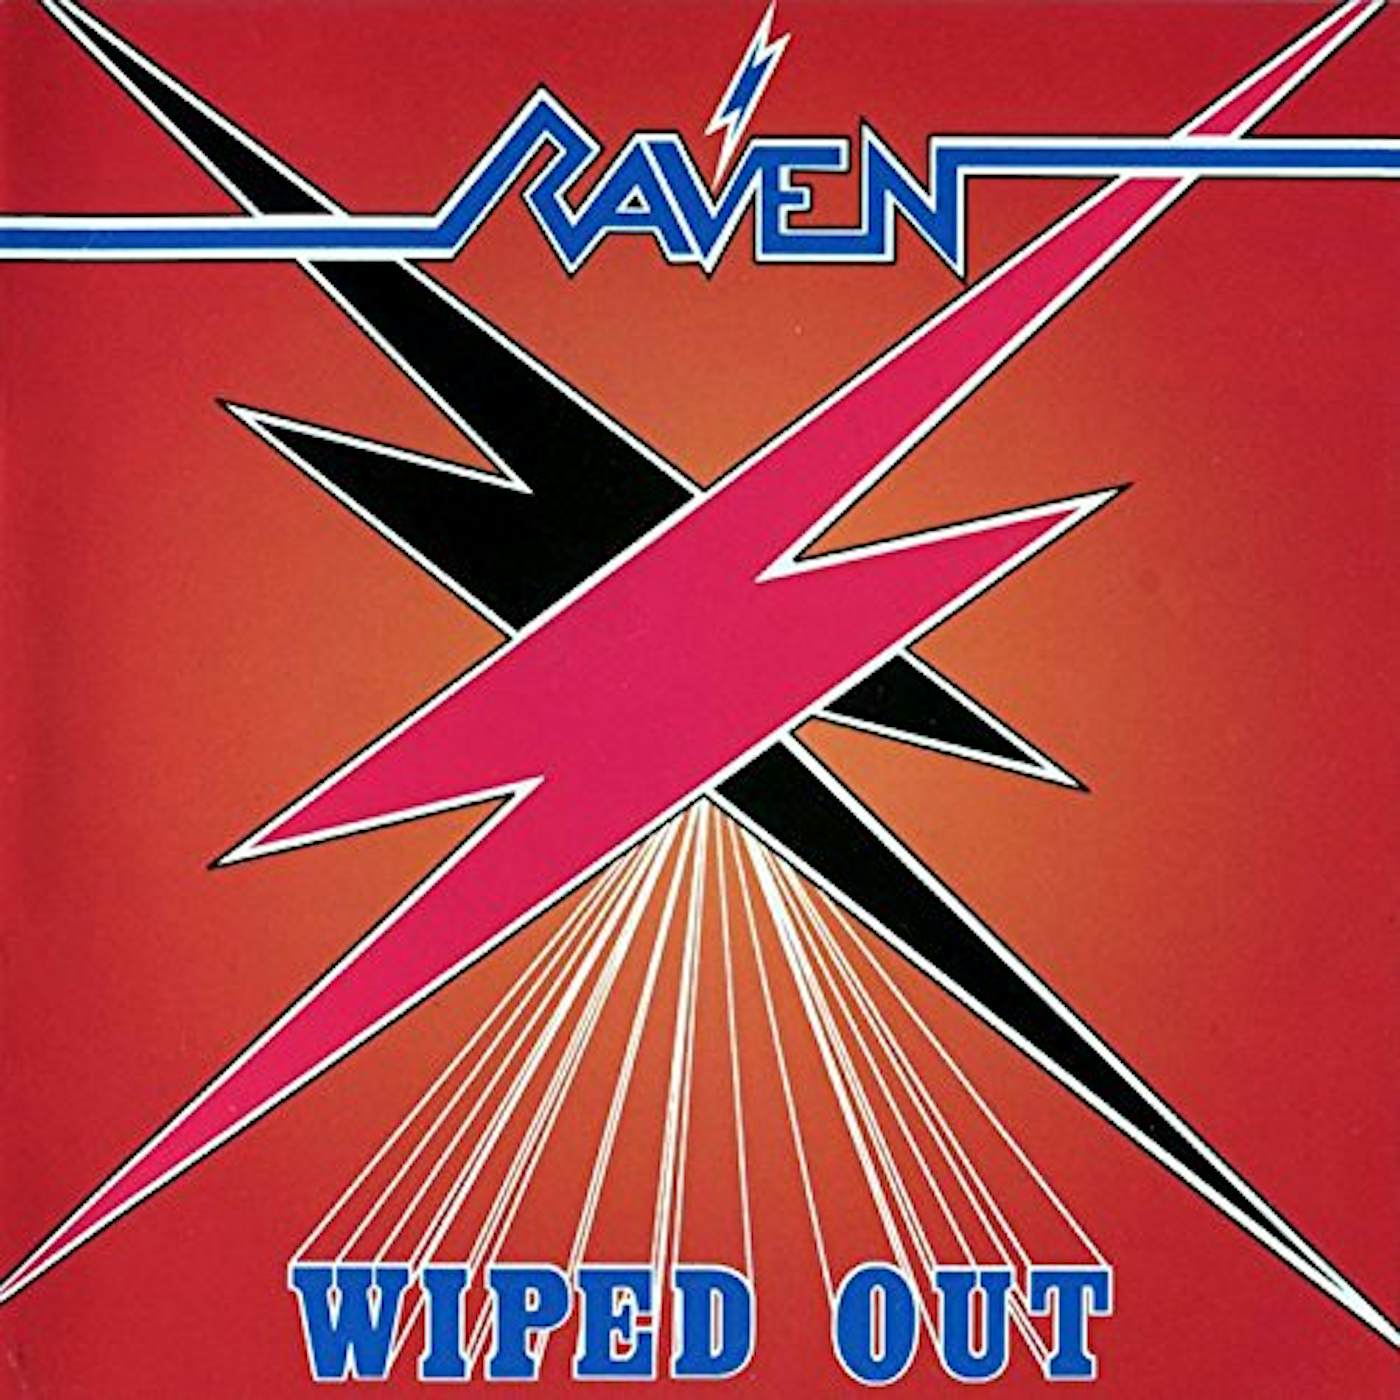 Raven Wiped Out Vinyl Record